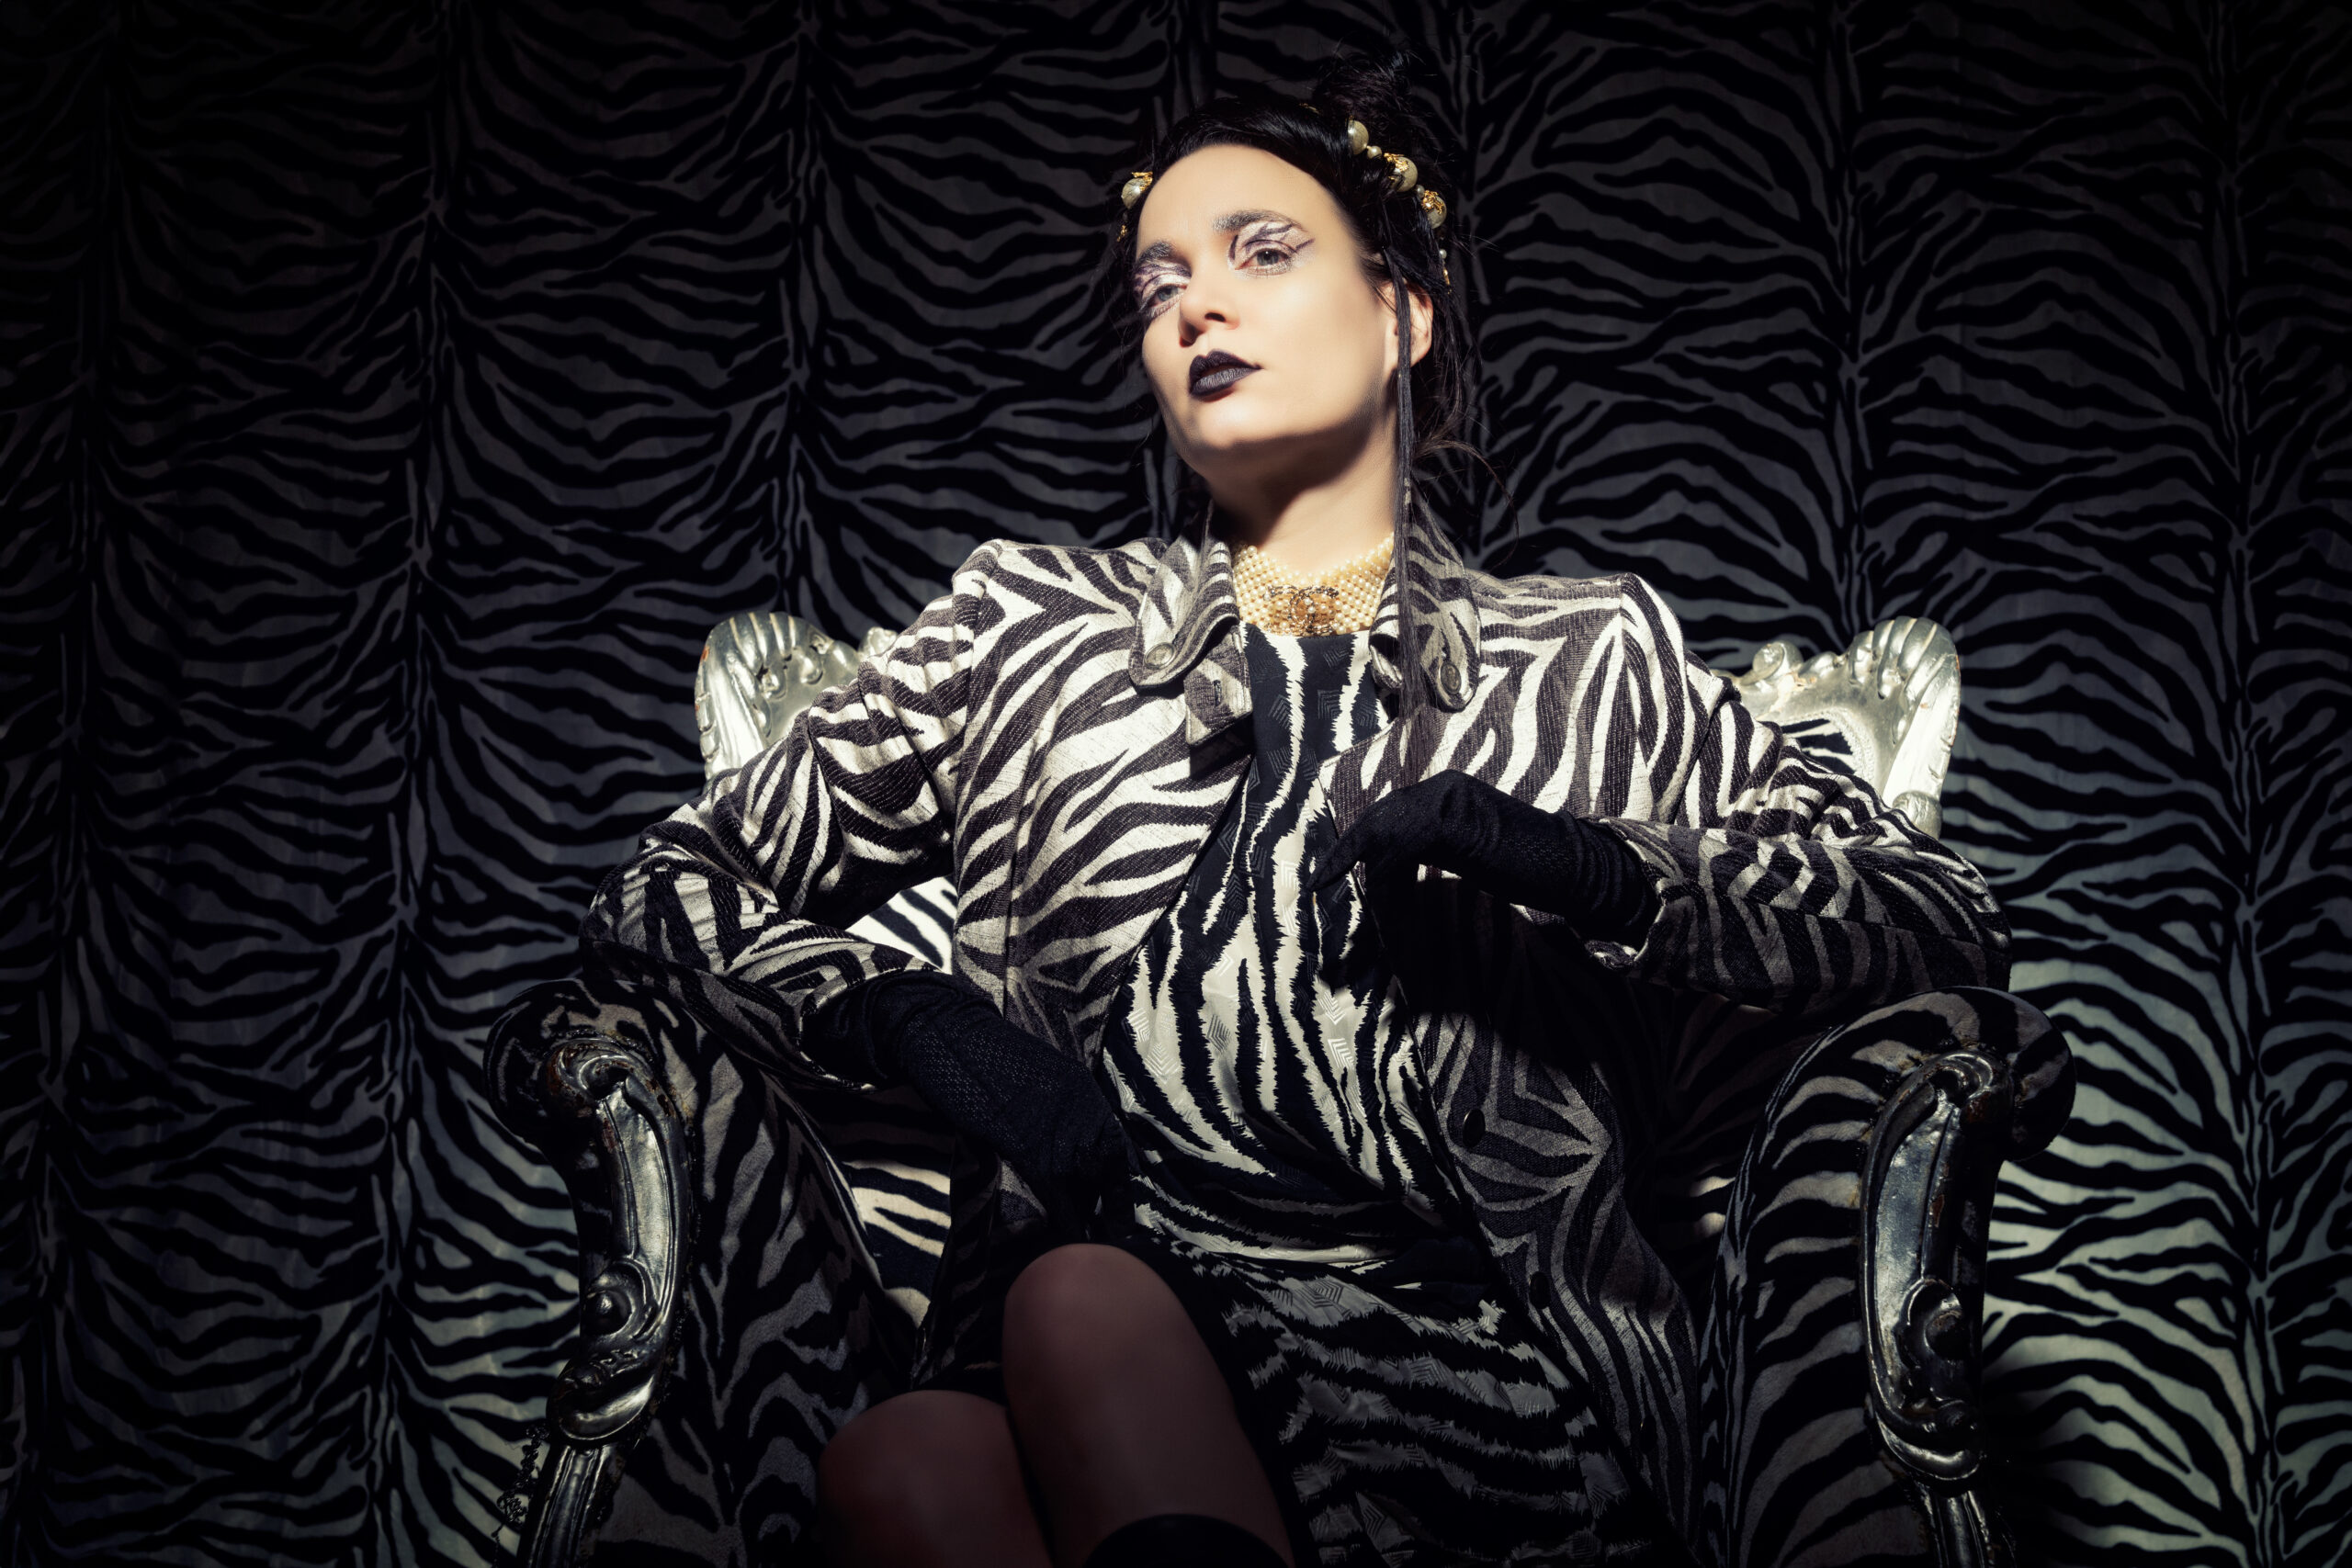 model in a zebra print suit for Improve your lighting a photography workshop by Frank Doorhof